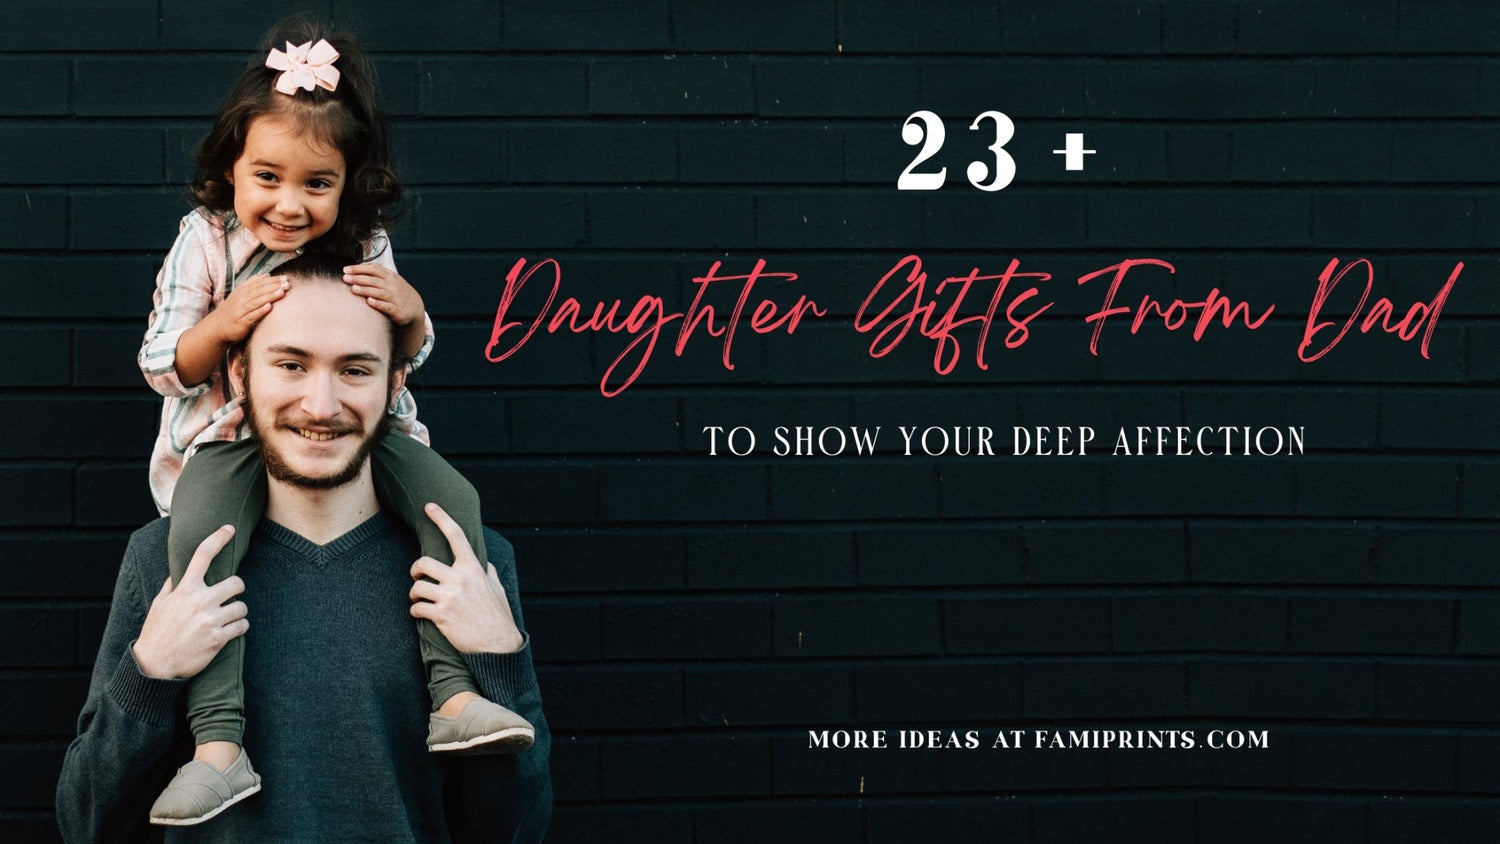 23+ Heartfelt Daughter Gifts From Dad To Show Your Deep Affection - FamiPrints | Trending Customizable Family Gifts